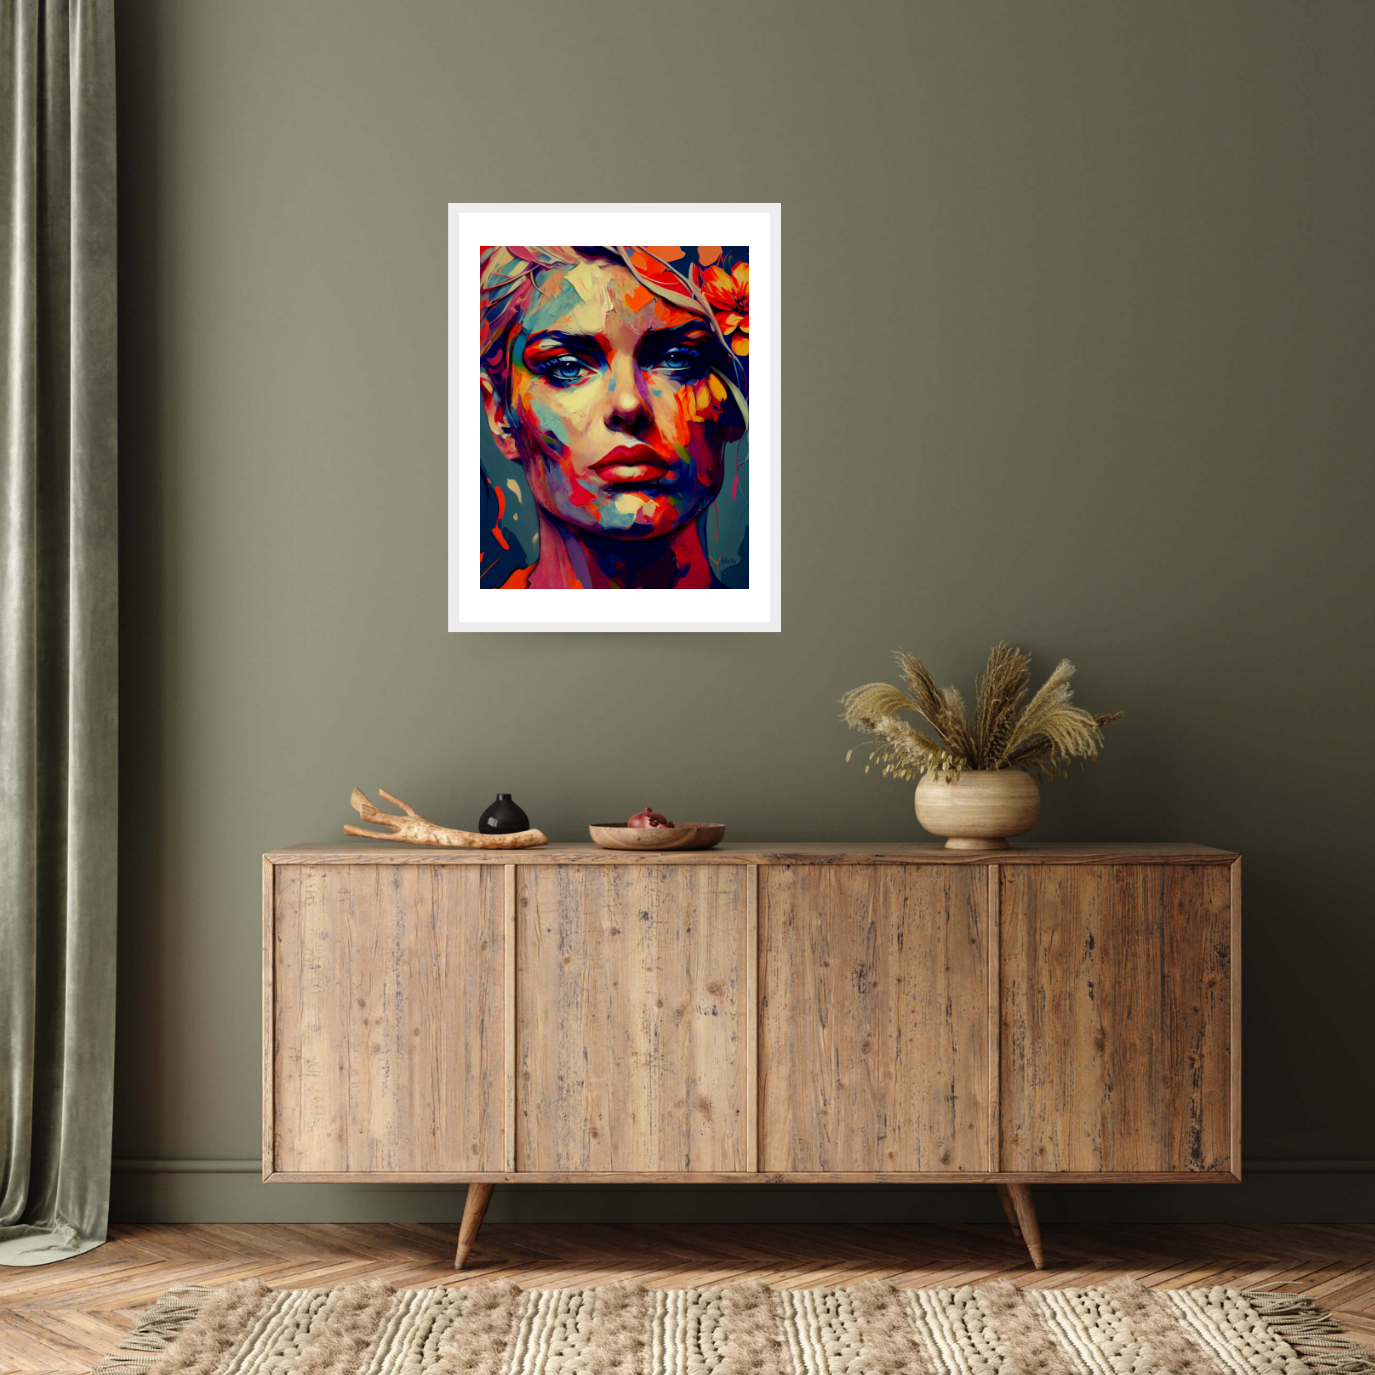 White framed print 'No Turning Back’ by Blake Munch: A woman with piercing blue eyes faces the viewer, her face covered in an array of warm and cool toned brushstrokes.